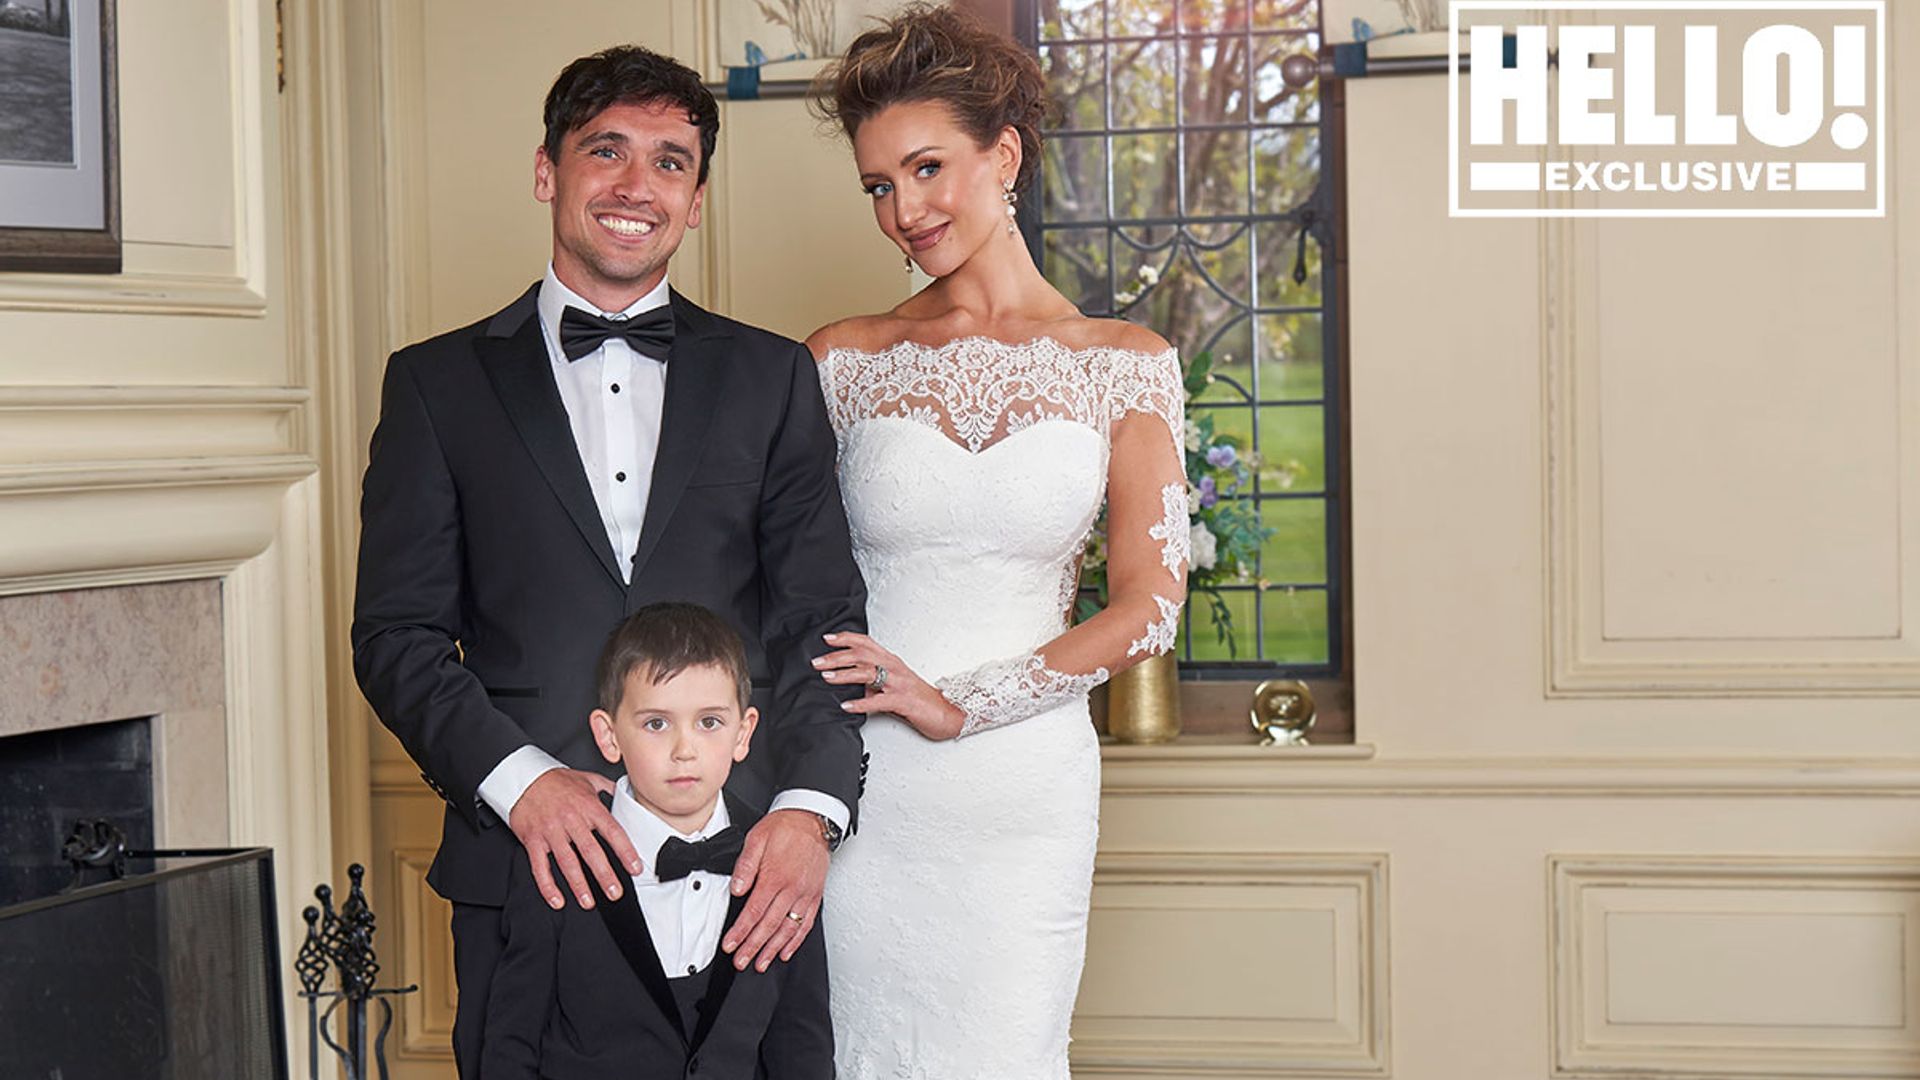 Catherine Tyldesley rewears wedding dress as she marks special anniversary - EXCLUSIVE